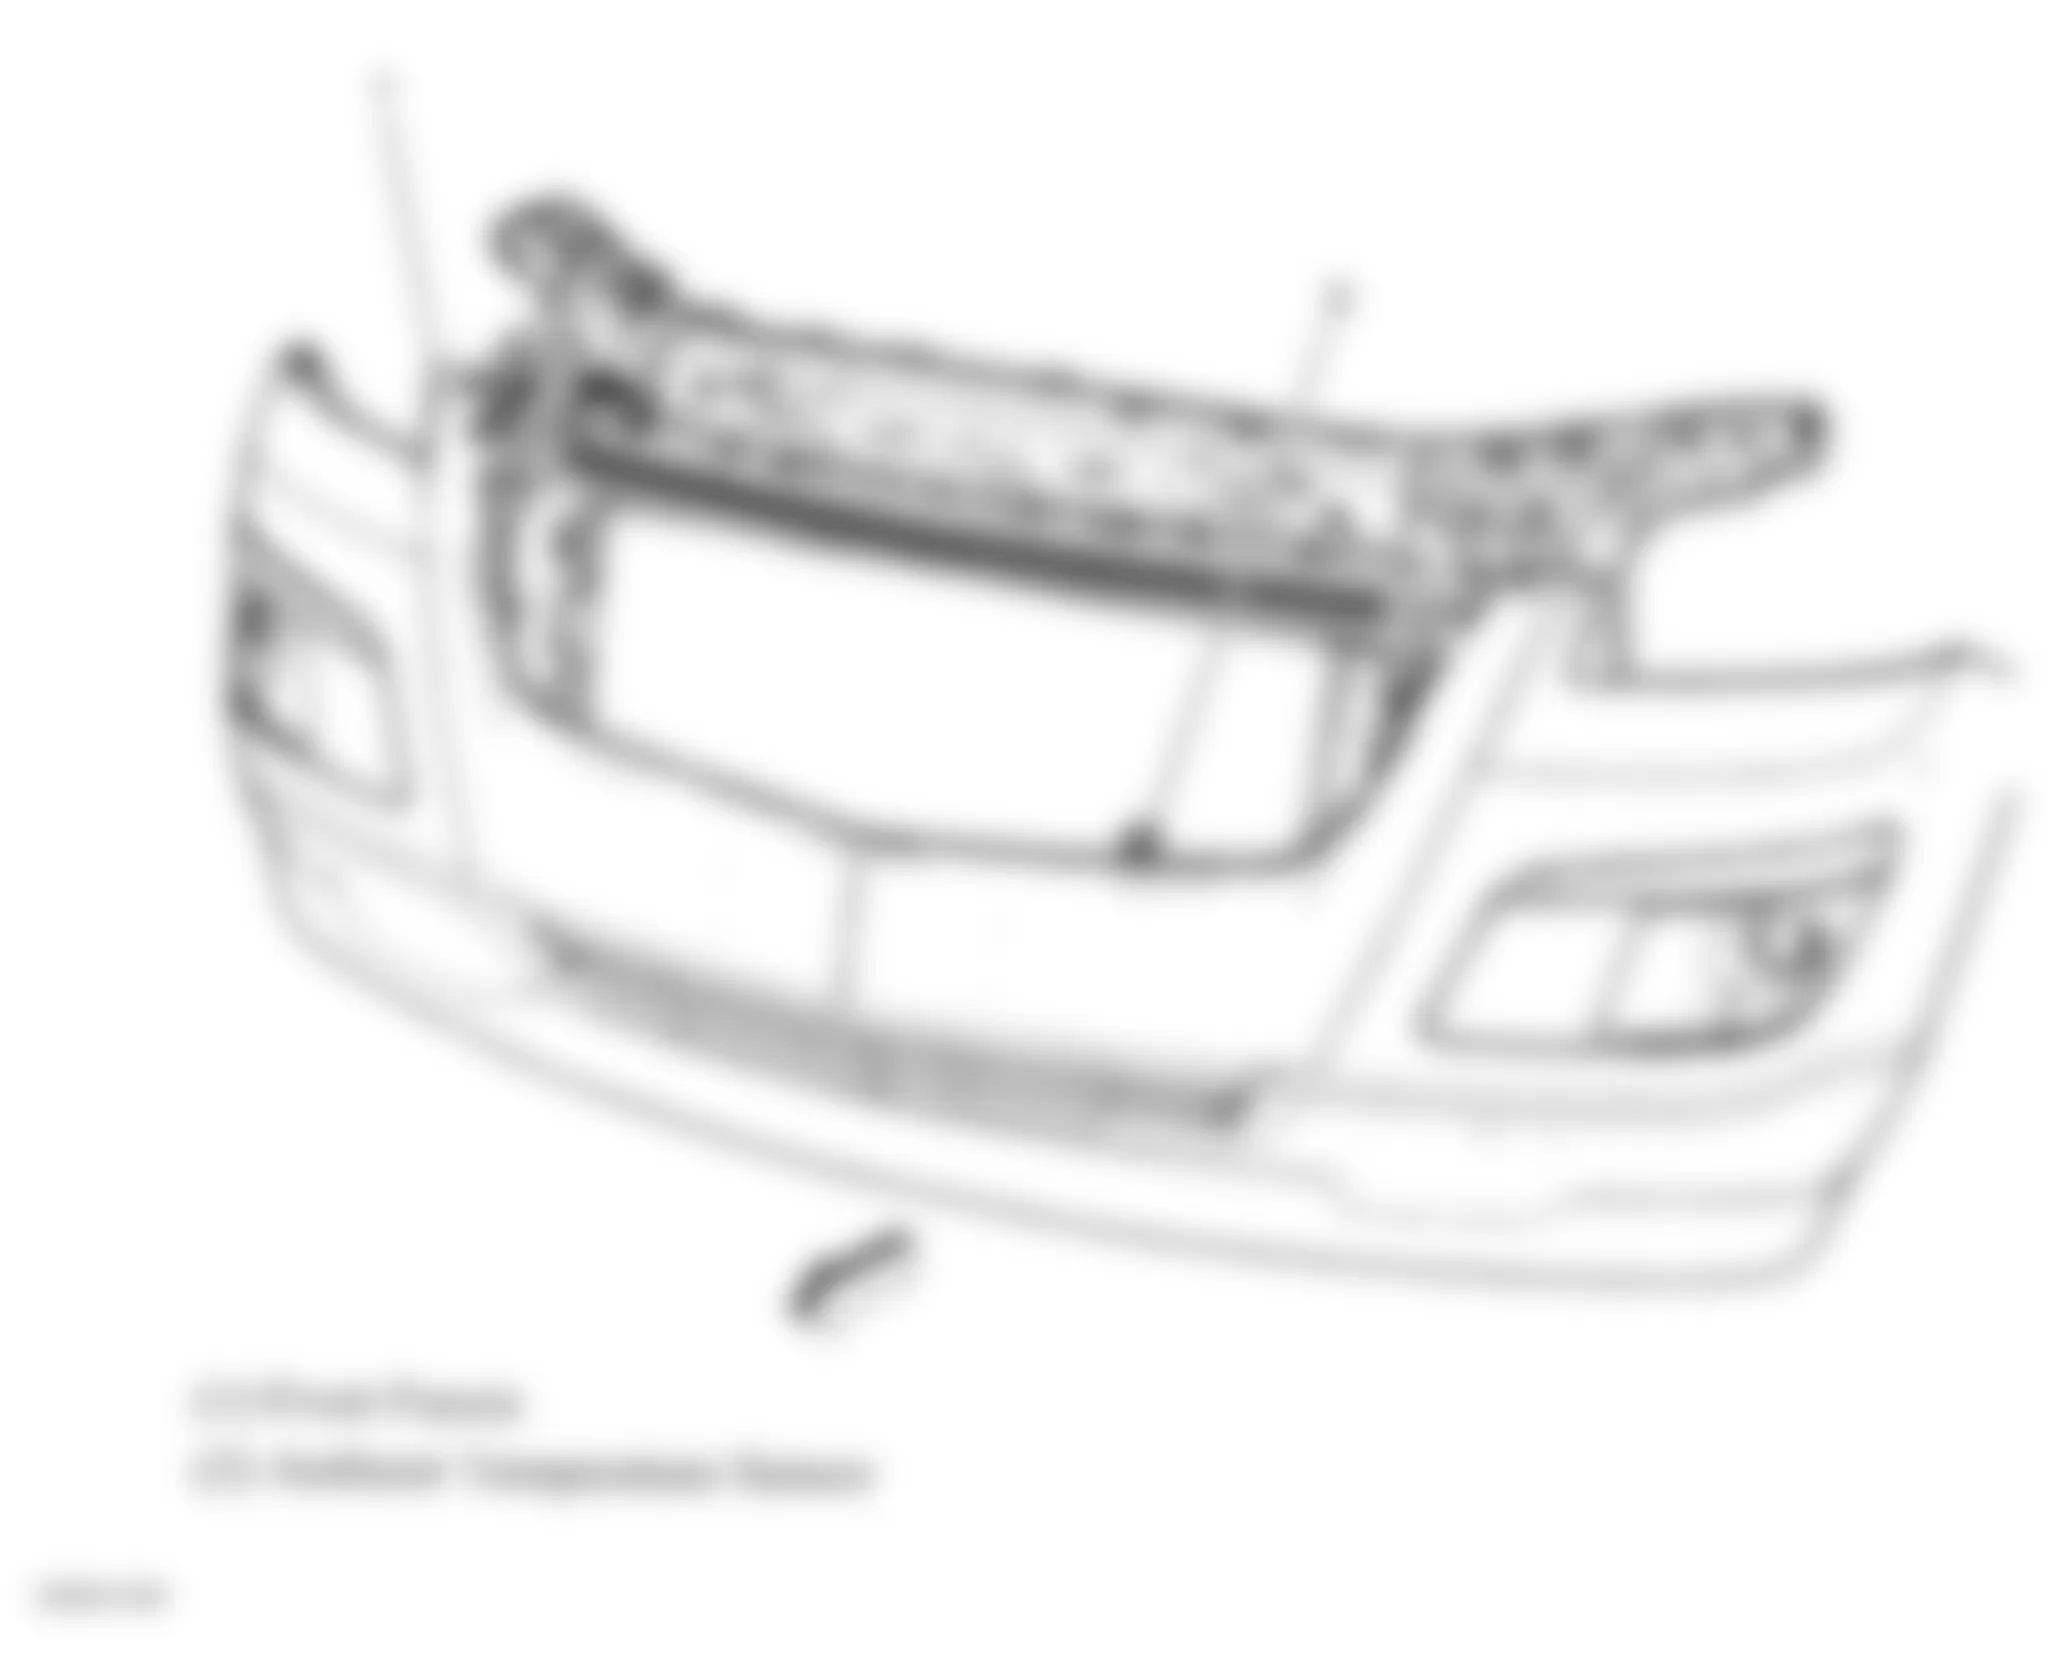 Buick Enclave CXL 2010 - Component Locations -  Behind Front Fascia